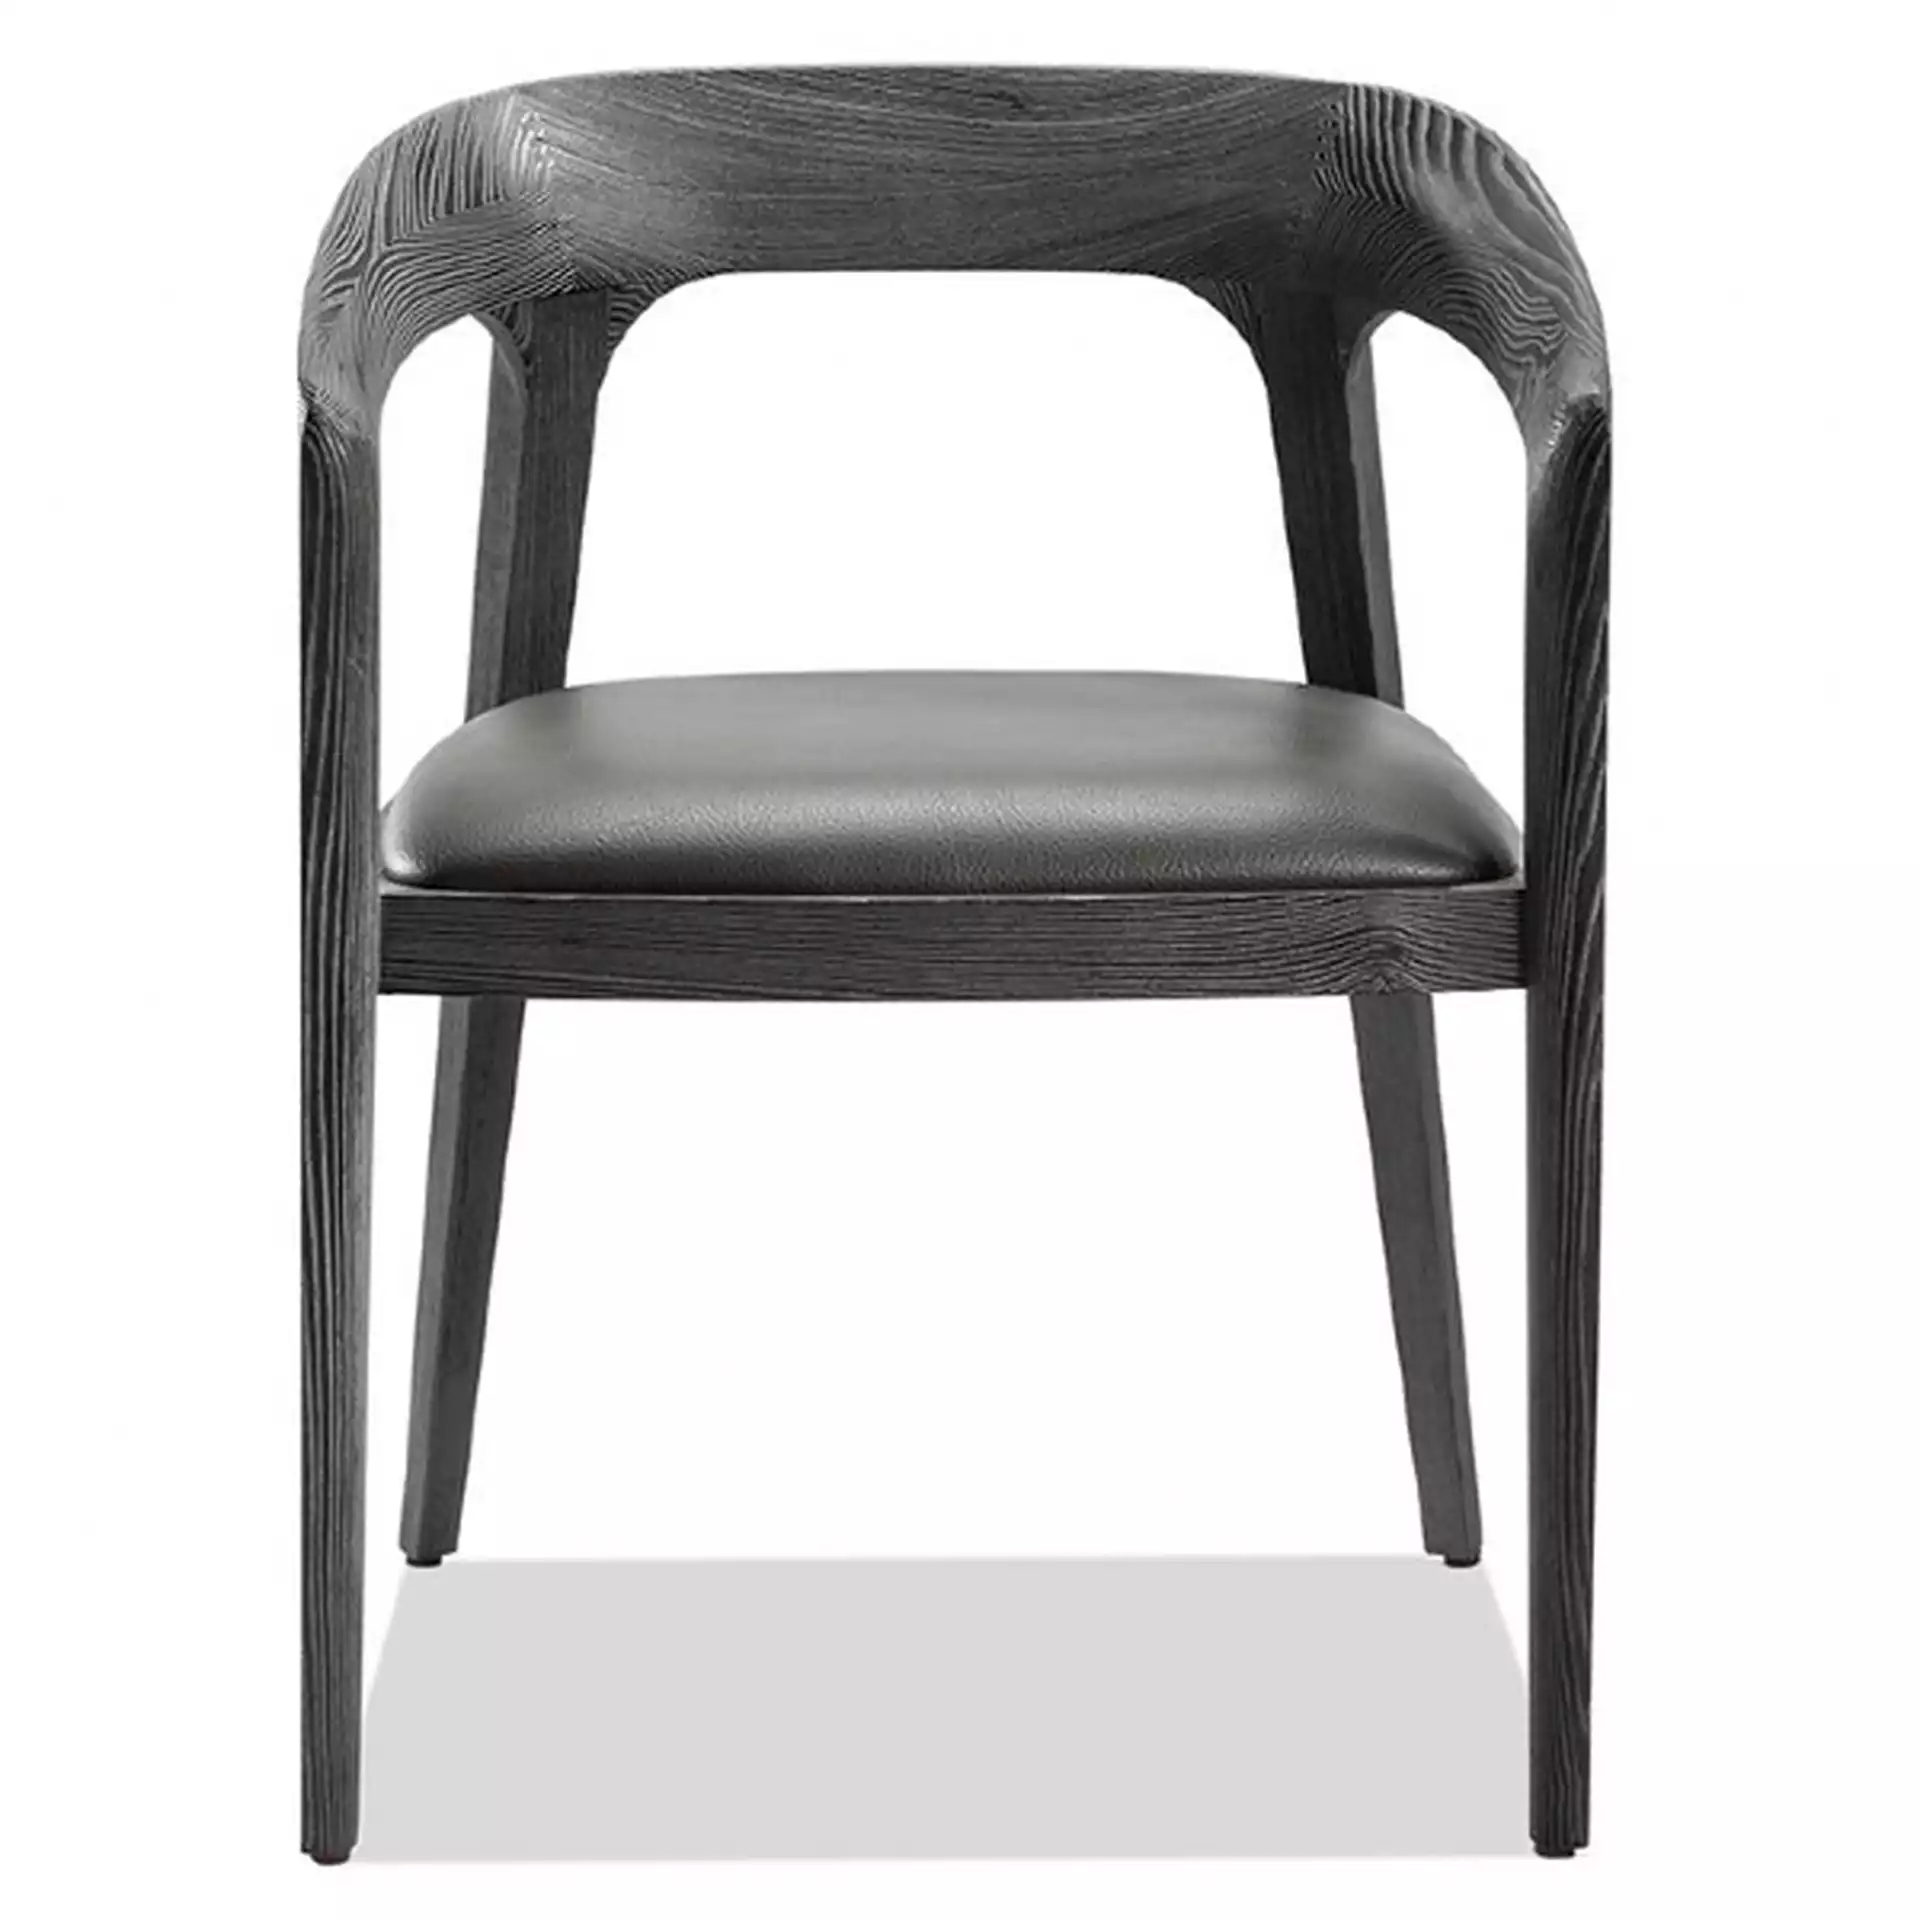 Interlude Kendra Mid Century Grey Leather Charcoal Wood Dining Arm Chair